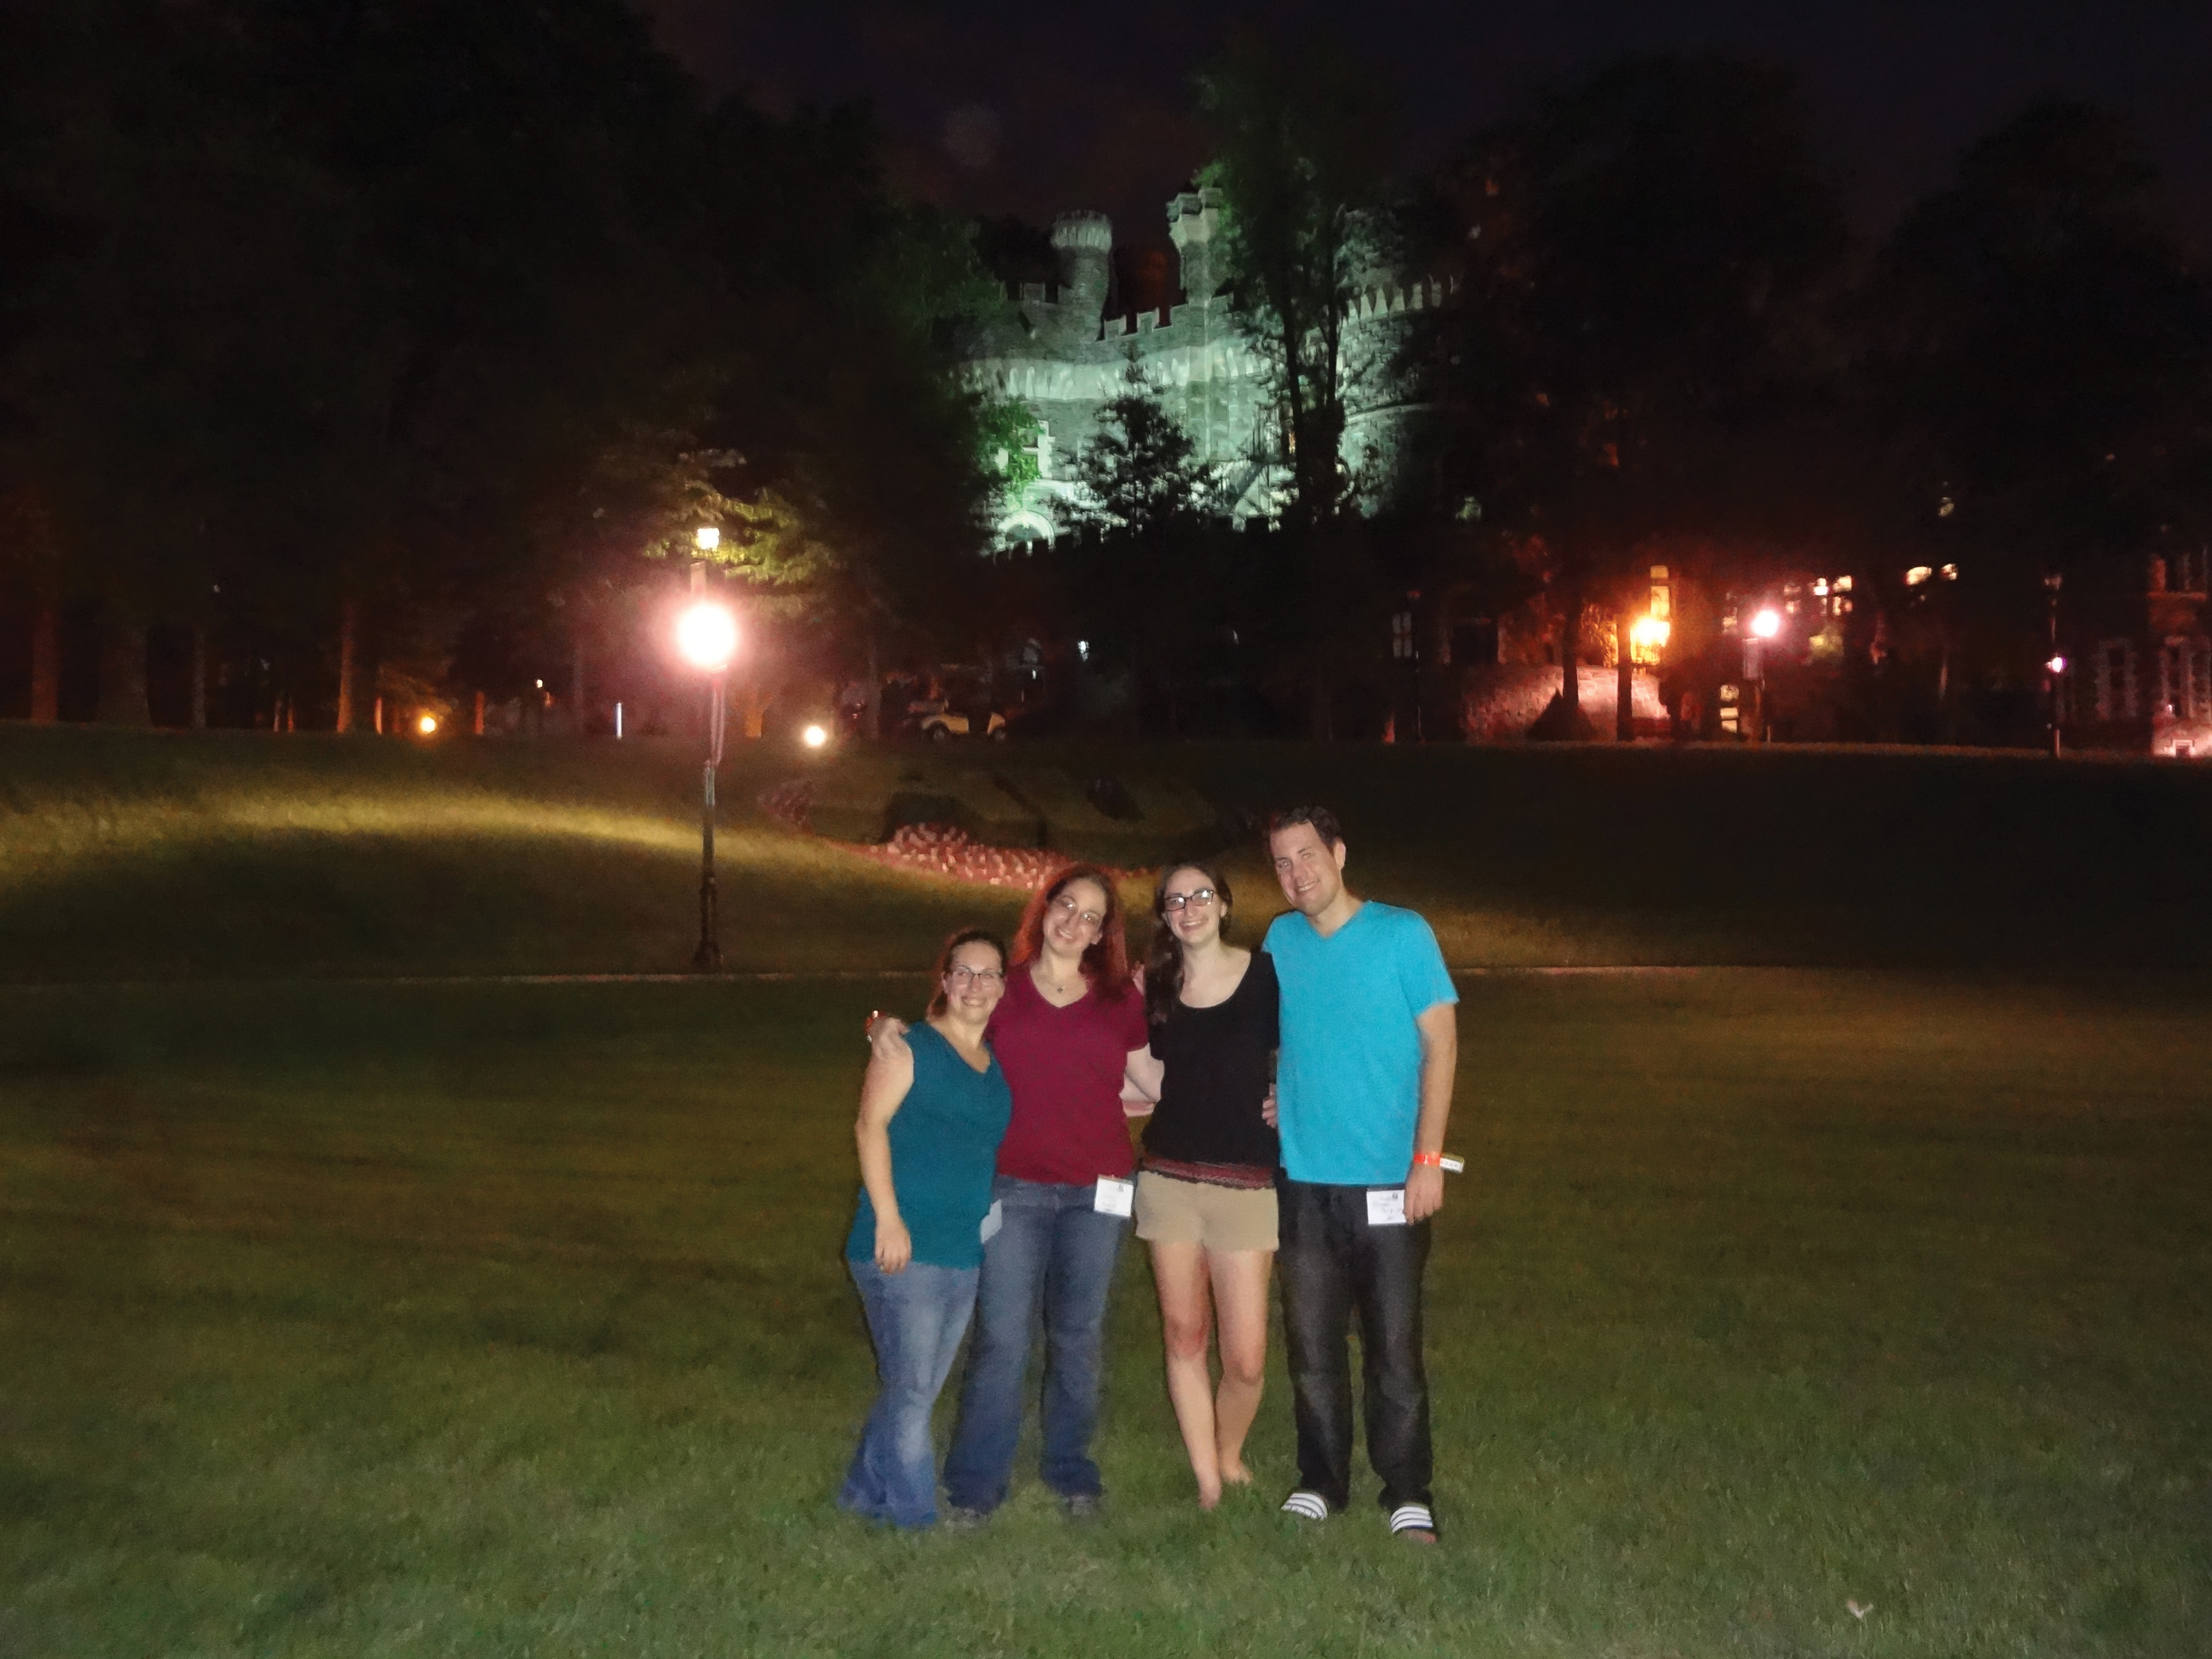 Four Alumni students from the Class of 2011 on Haber Green at night.